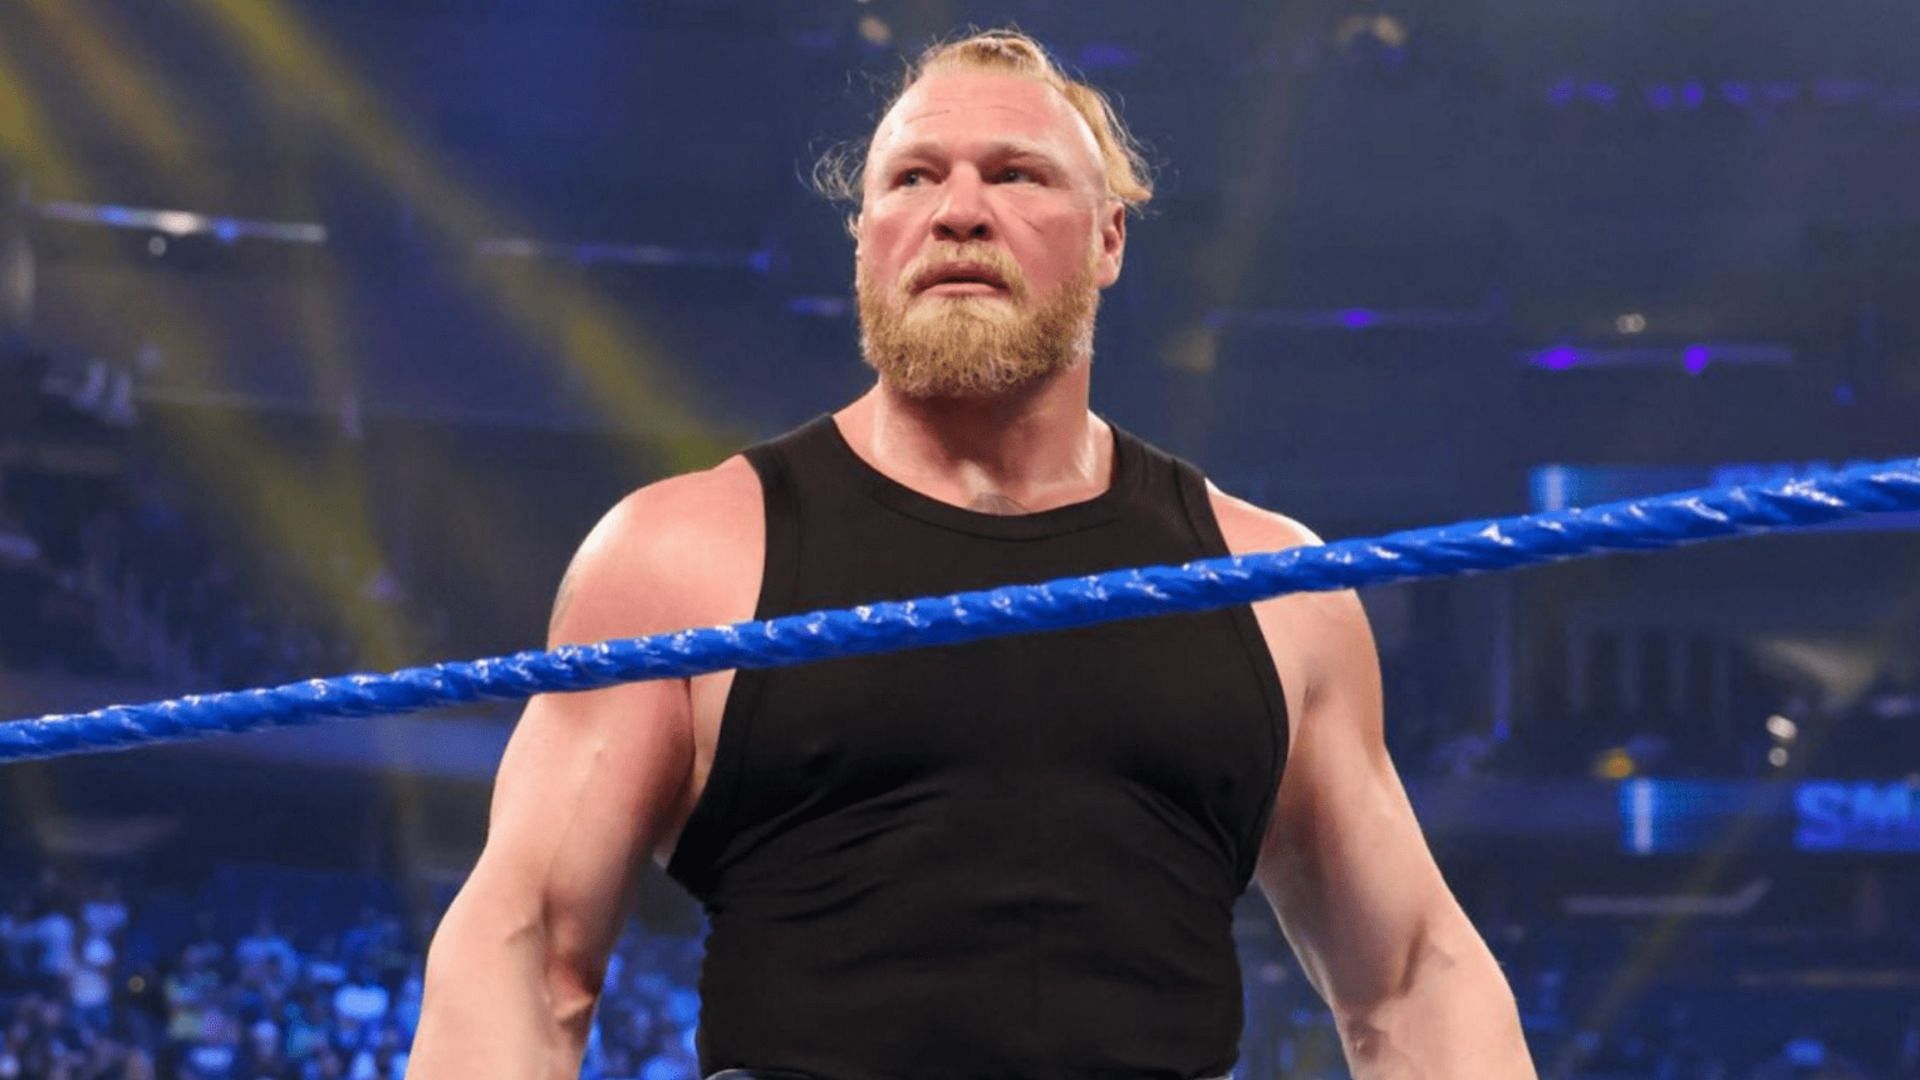 Brock Lesnar is the second wealthiest superstar on the current roster